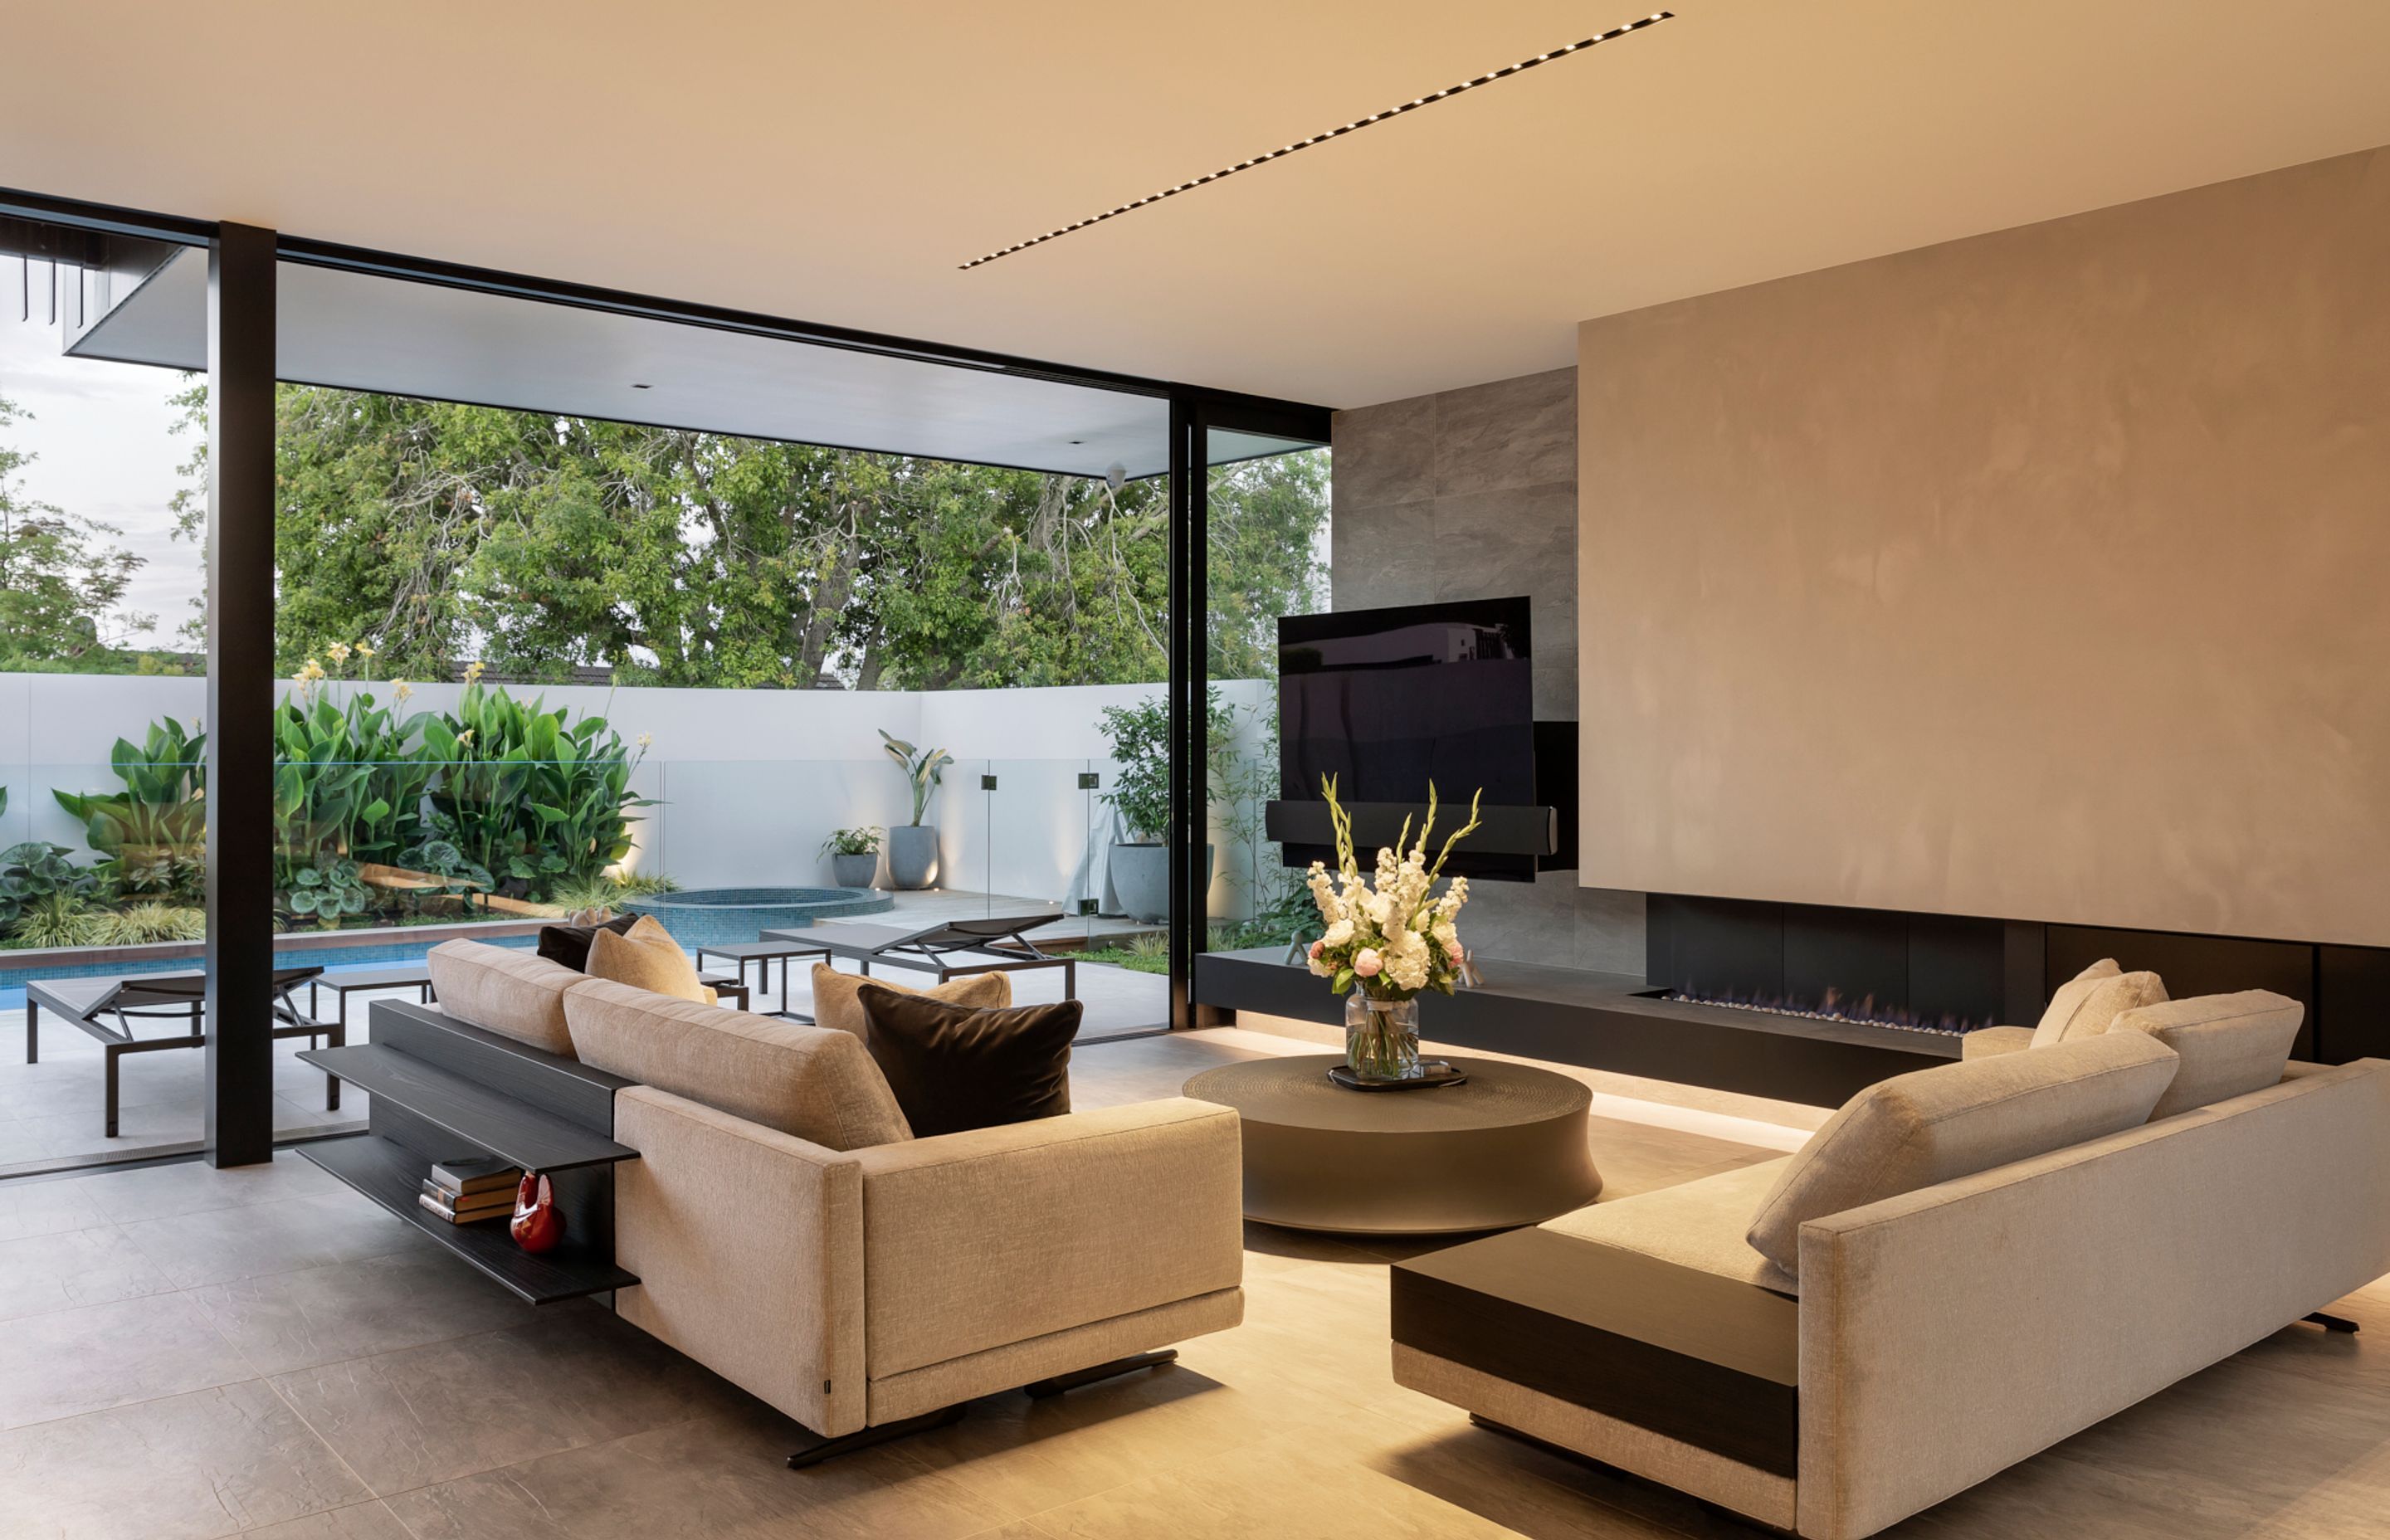 Huge sliding doors open up the lounge to the courtyard, effectively doubling the living space.